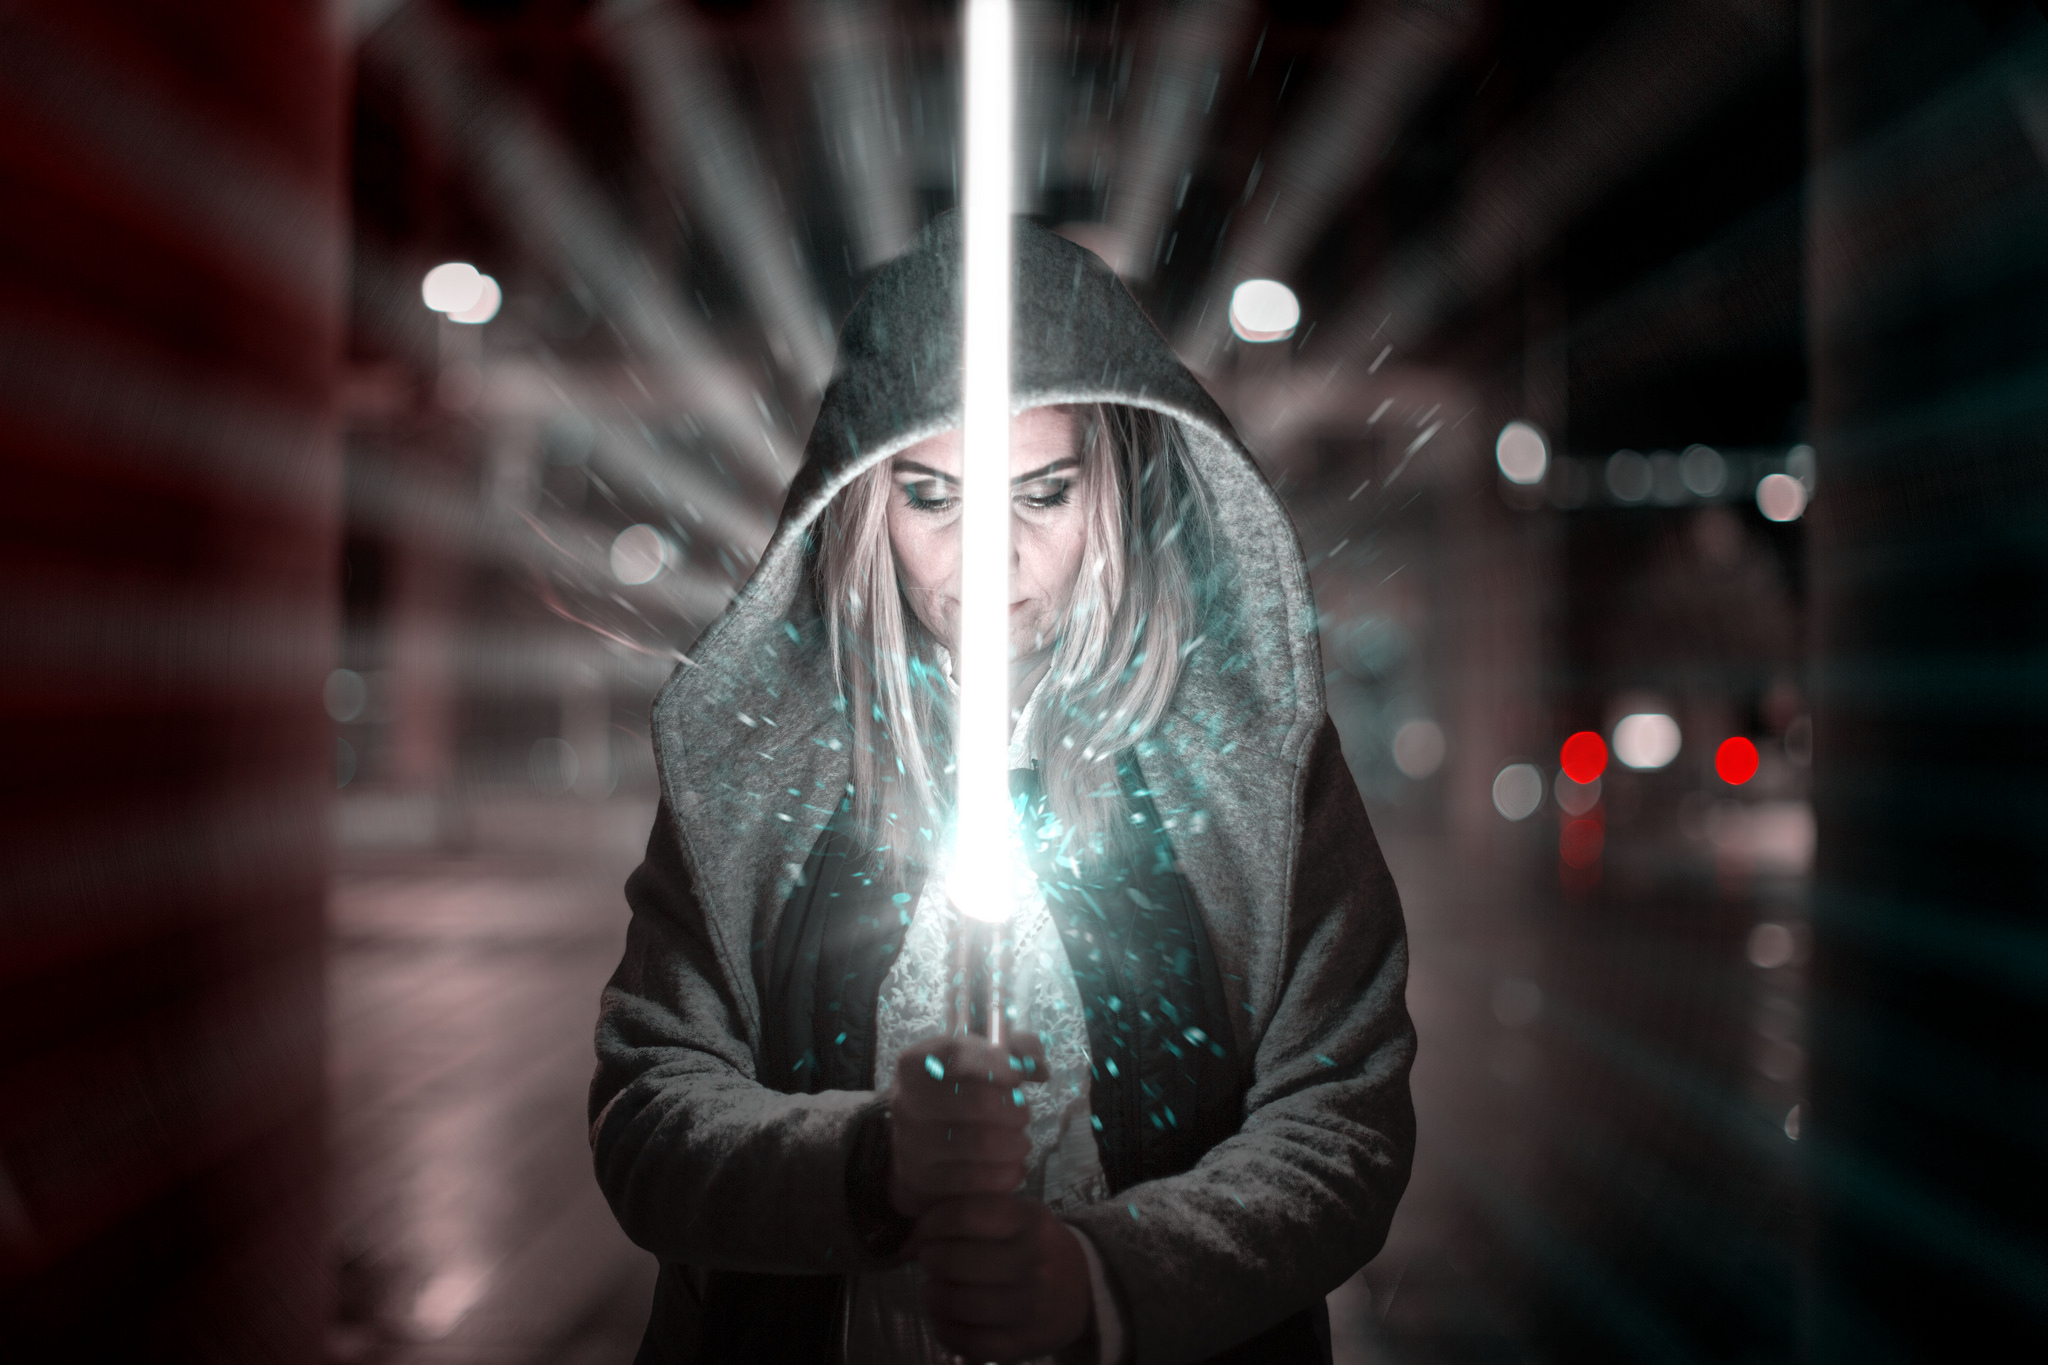 Disney commissioned Star Wars fan and photographer Matt Scutt to create a series of stunning light trail pictures using the famous Jedi weapon, including this image in Manchester